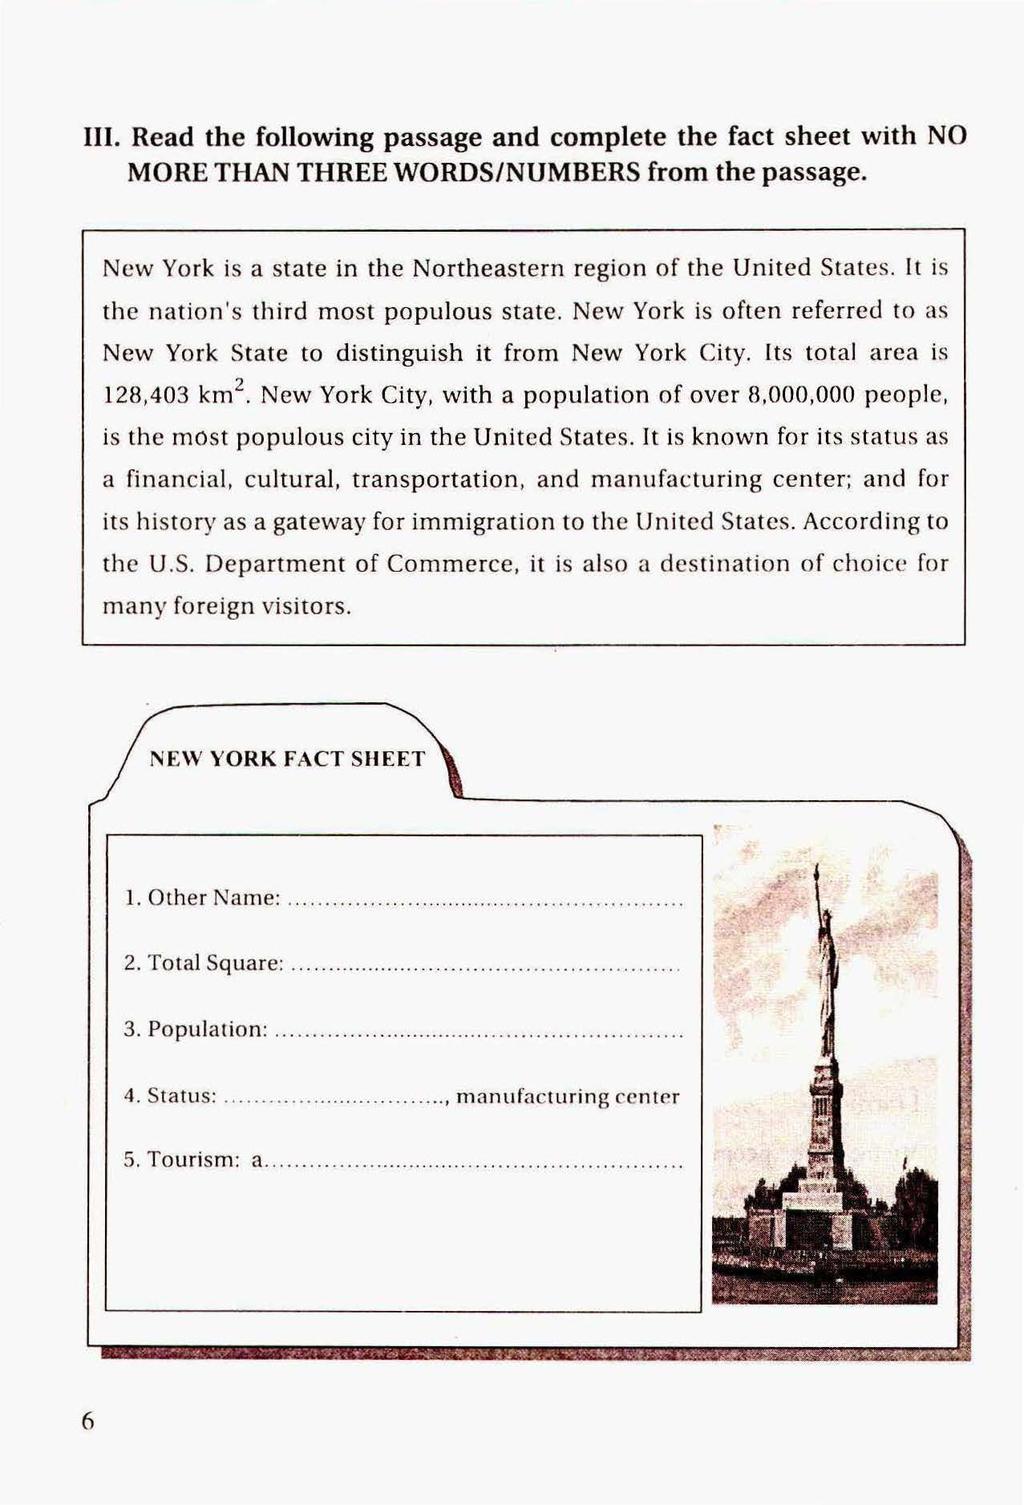 III. Read the following passage and complete the fact sheet with NO MORE THAN THREE WORDS/NUMBERS from the passage. New Yo rk is a state in the Northeastern region of the United States.